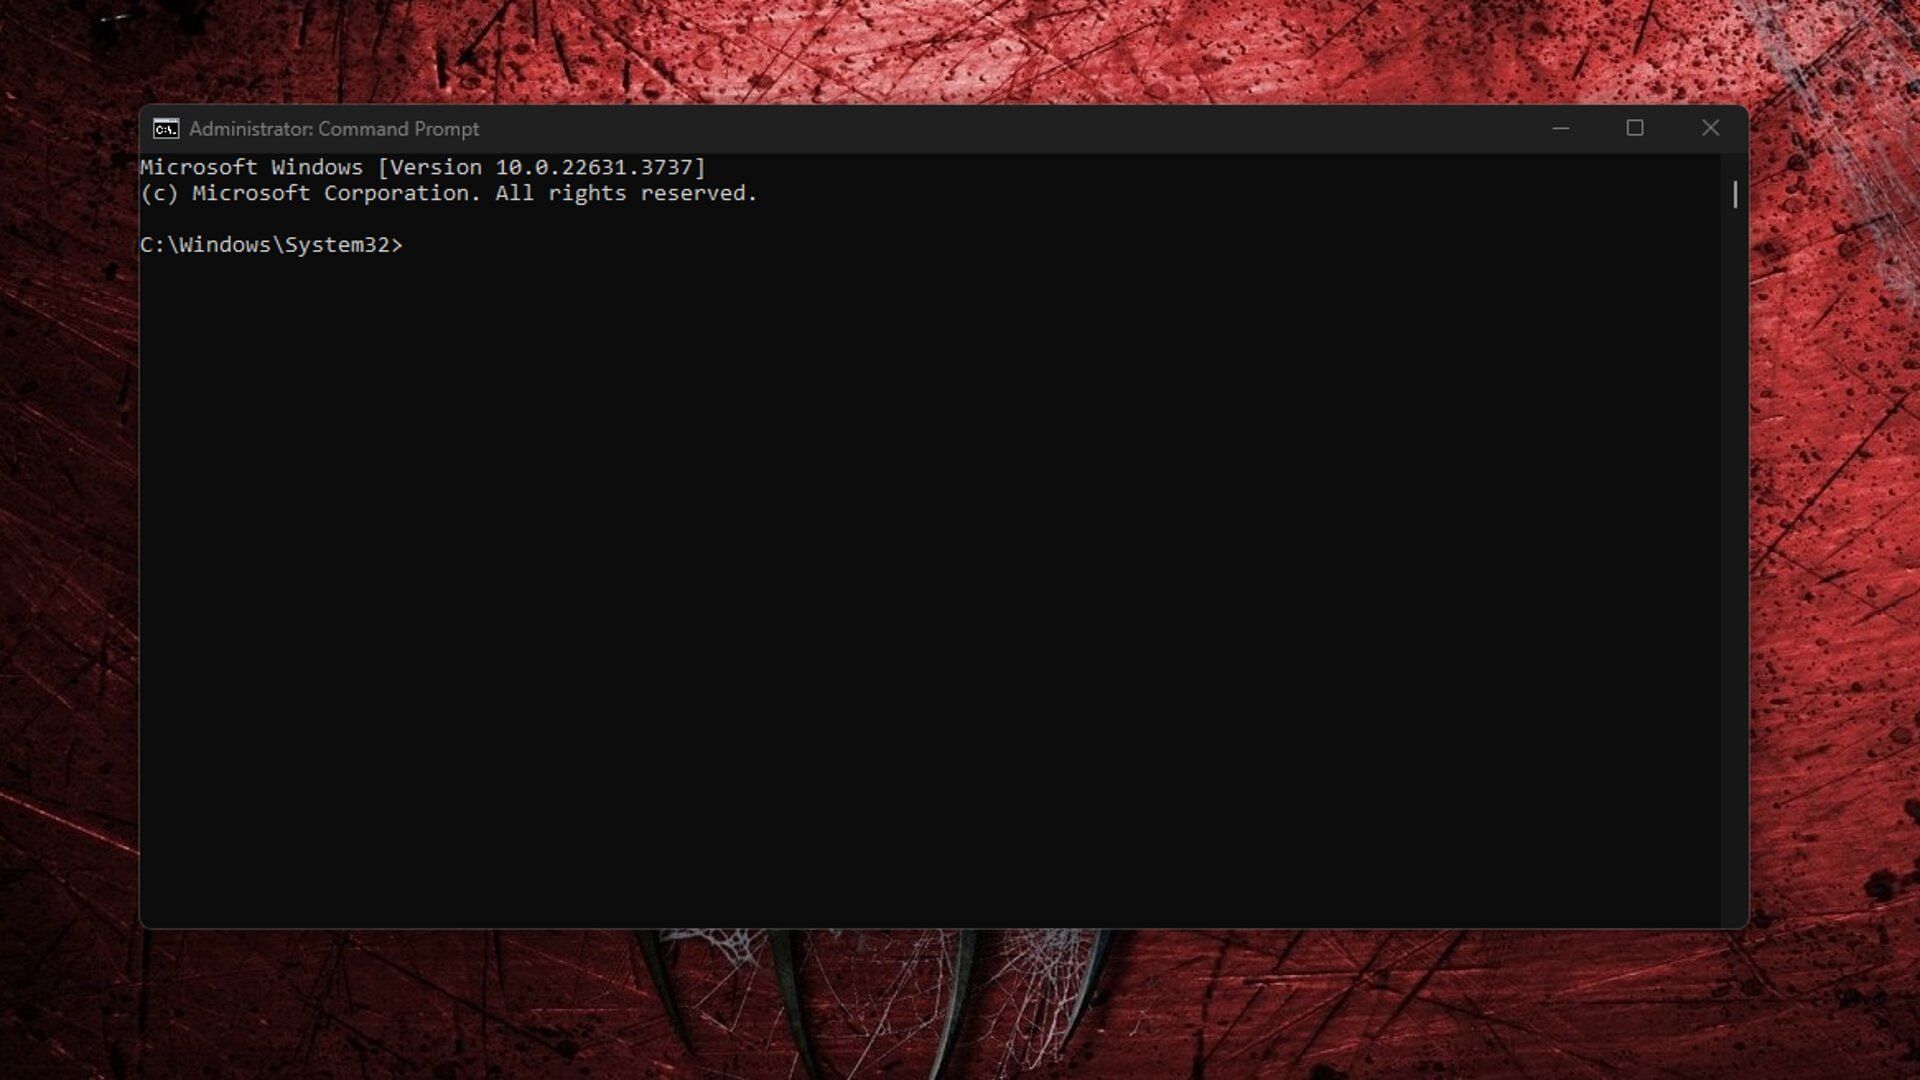 You can open command prompt as admin and run commands to flush DNS (Image via Windows)